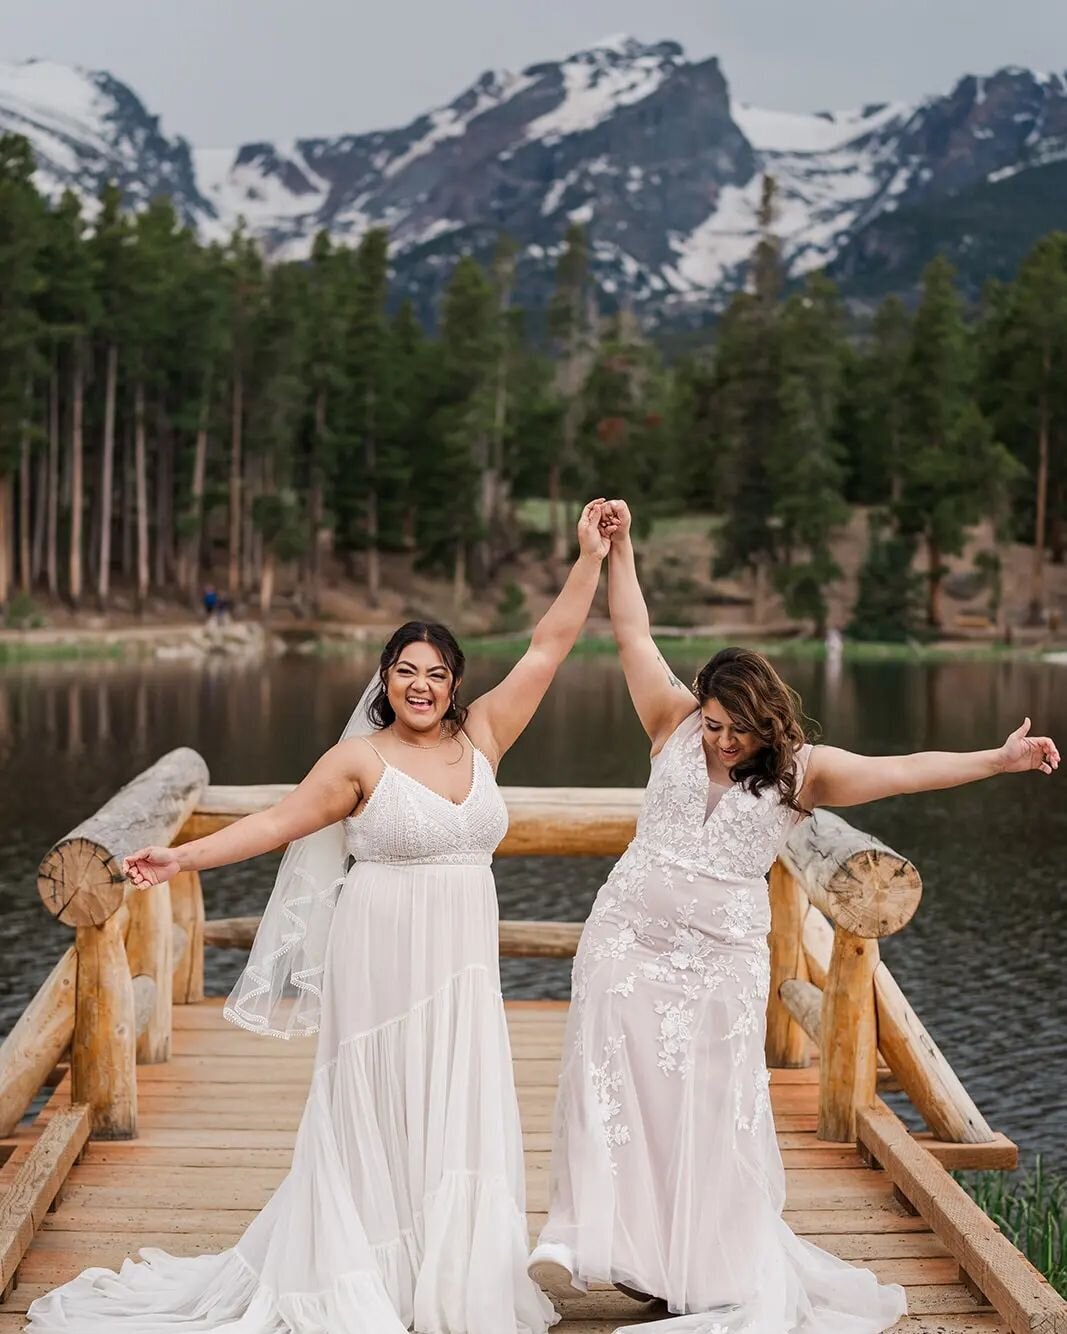 Embark on an unforgettable adventure elopement at Rocky Mountain National Park, and let Sam Immer Photography capture your love and excitement in this stunning landscape.